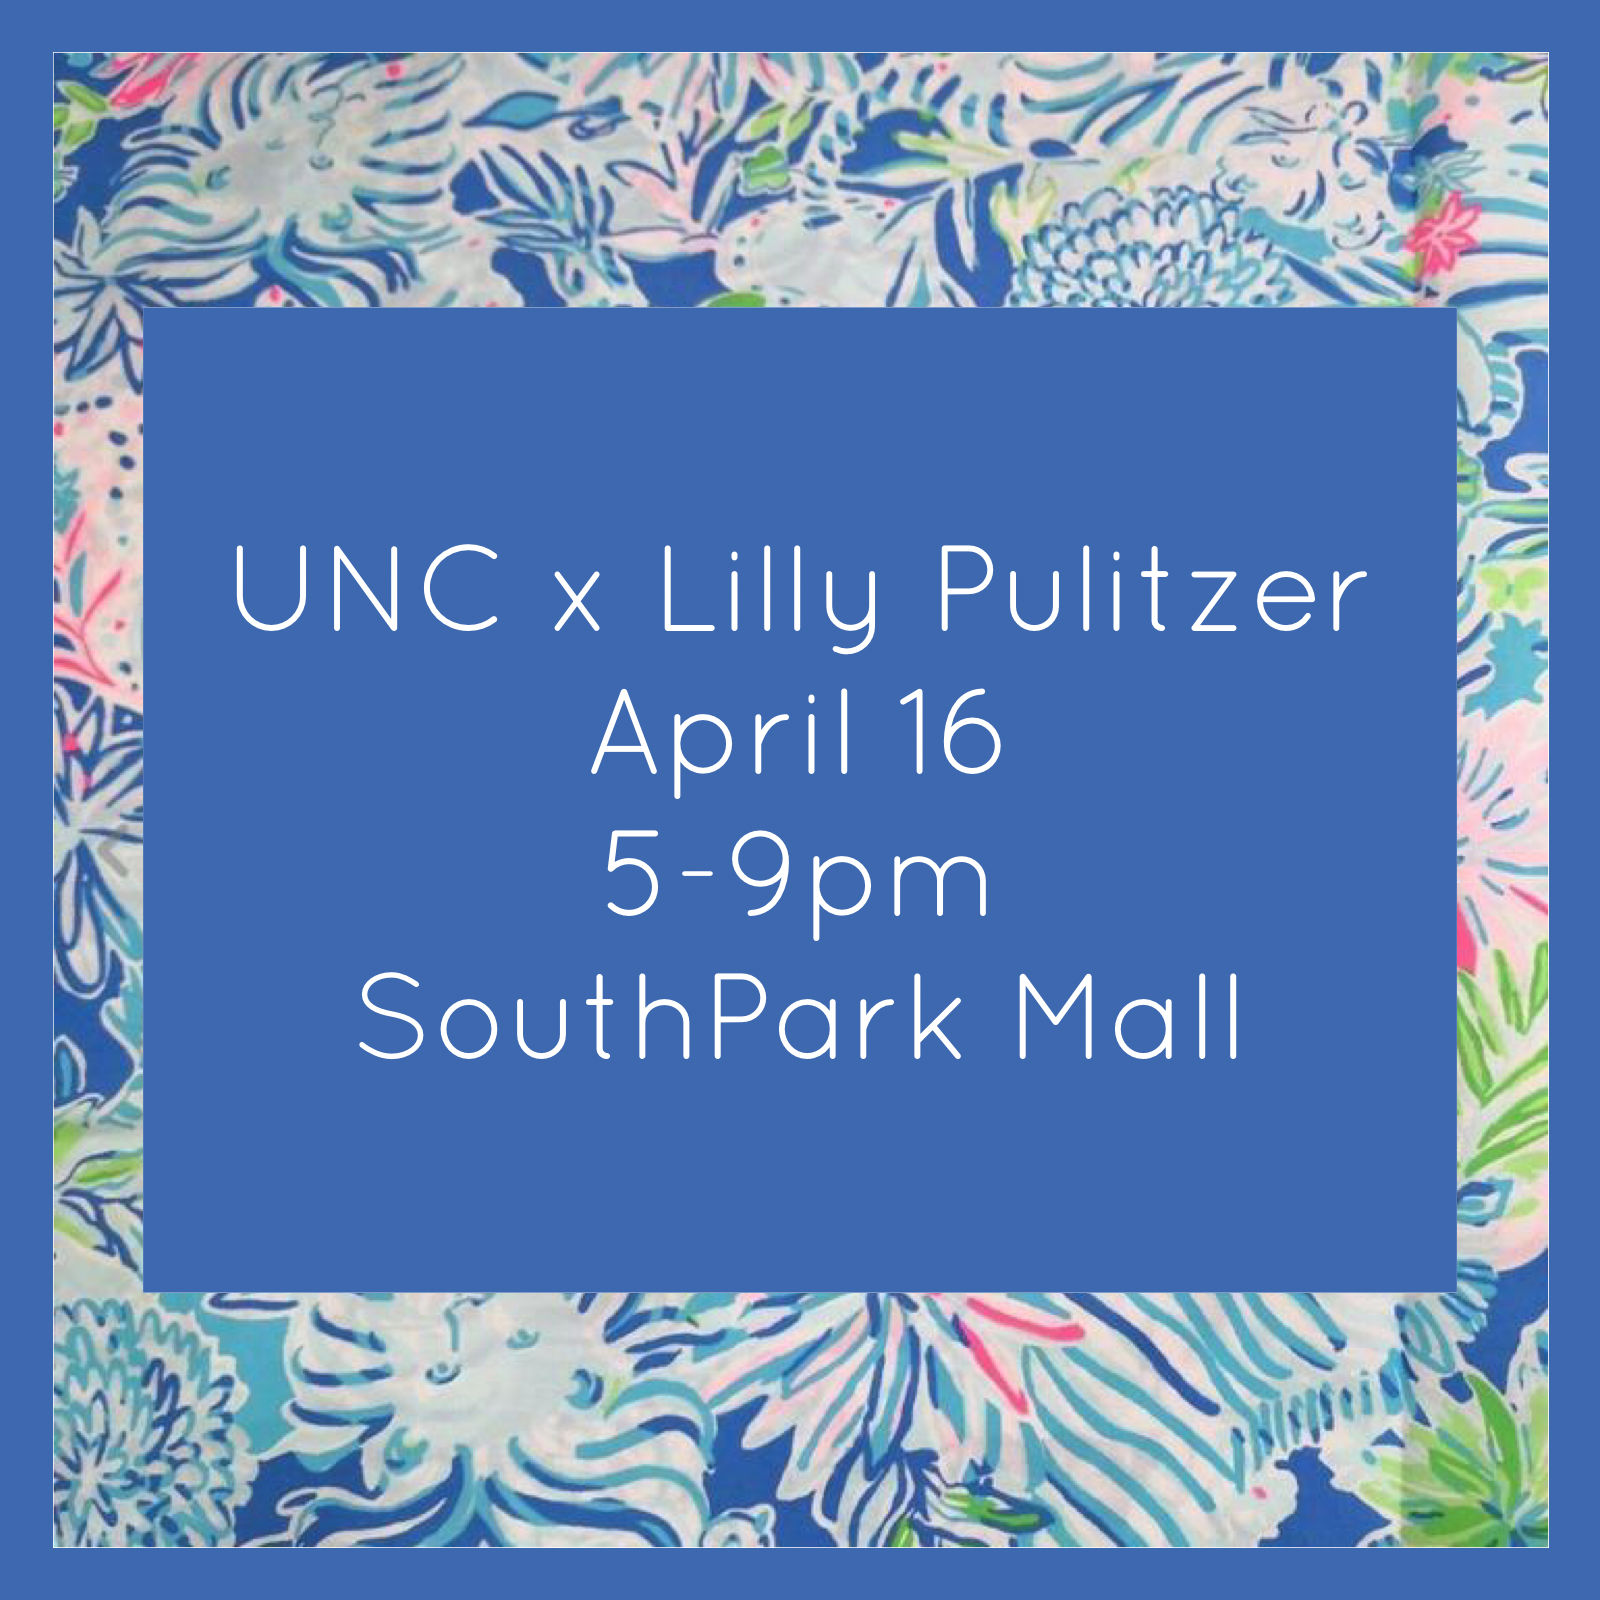 UNC Alumni Shop and Share Event at Lilly Pulitzer SouthPark (Apr 16)